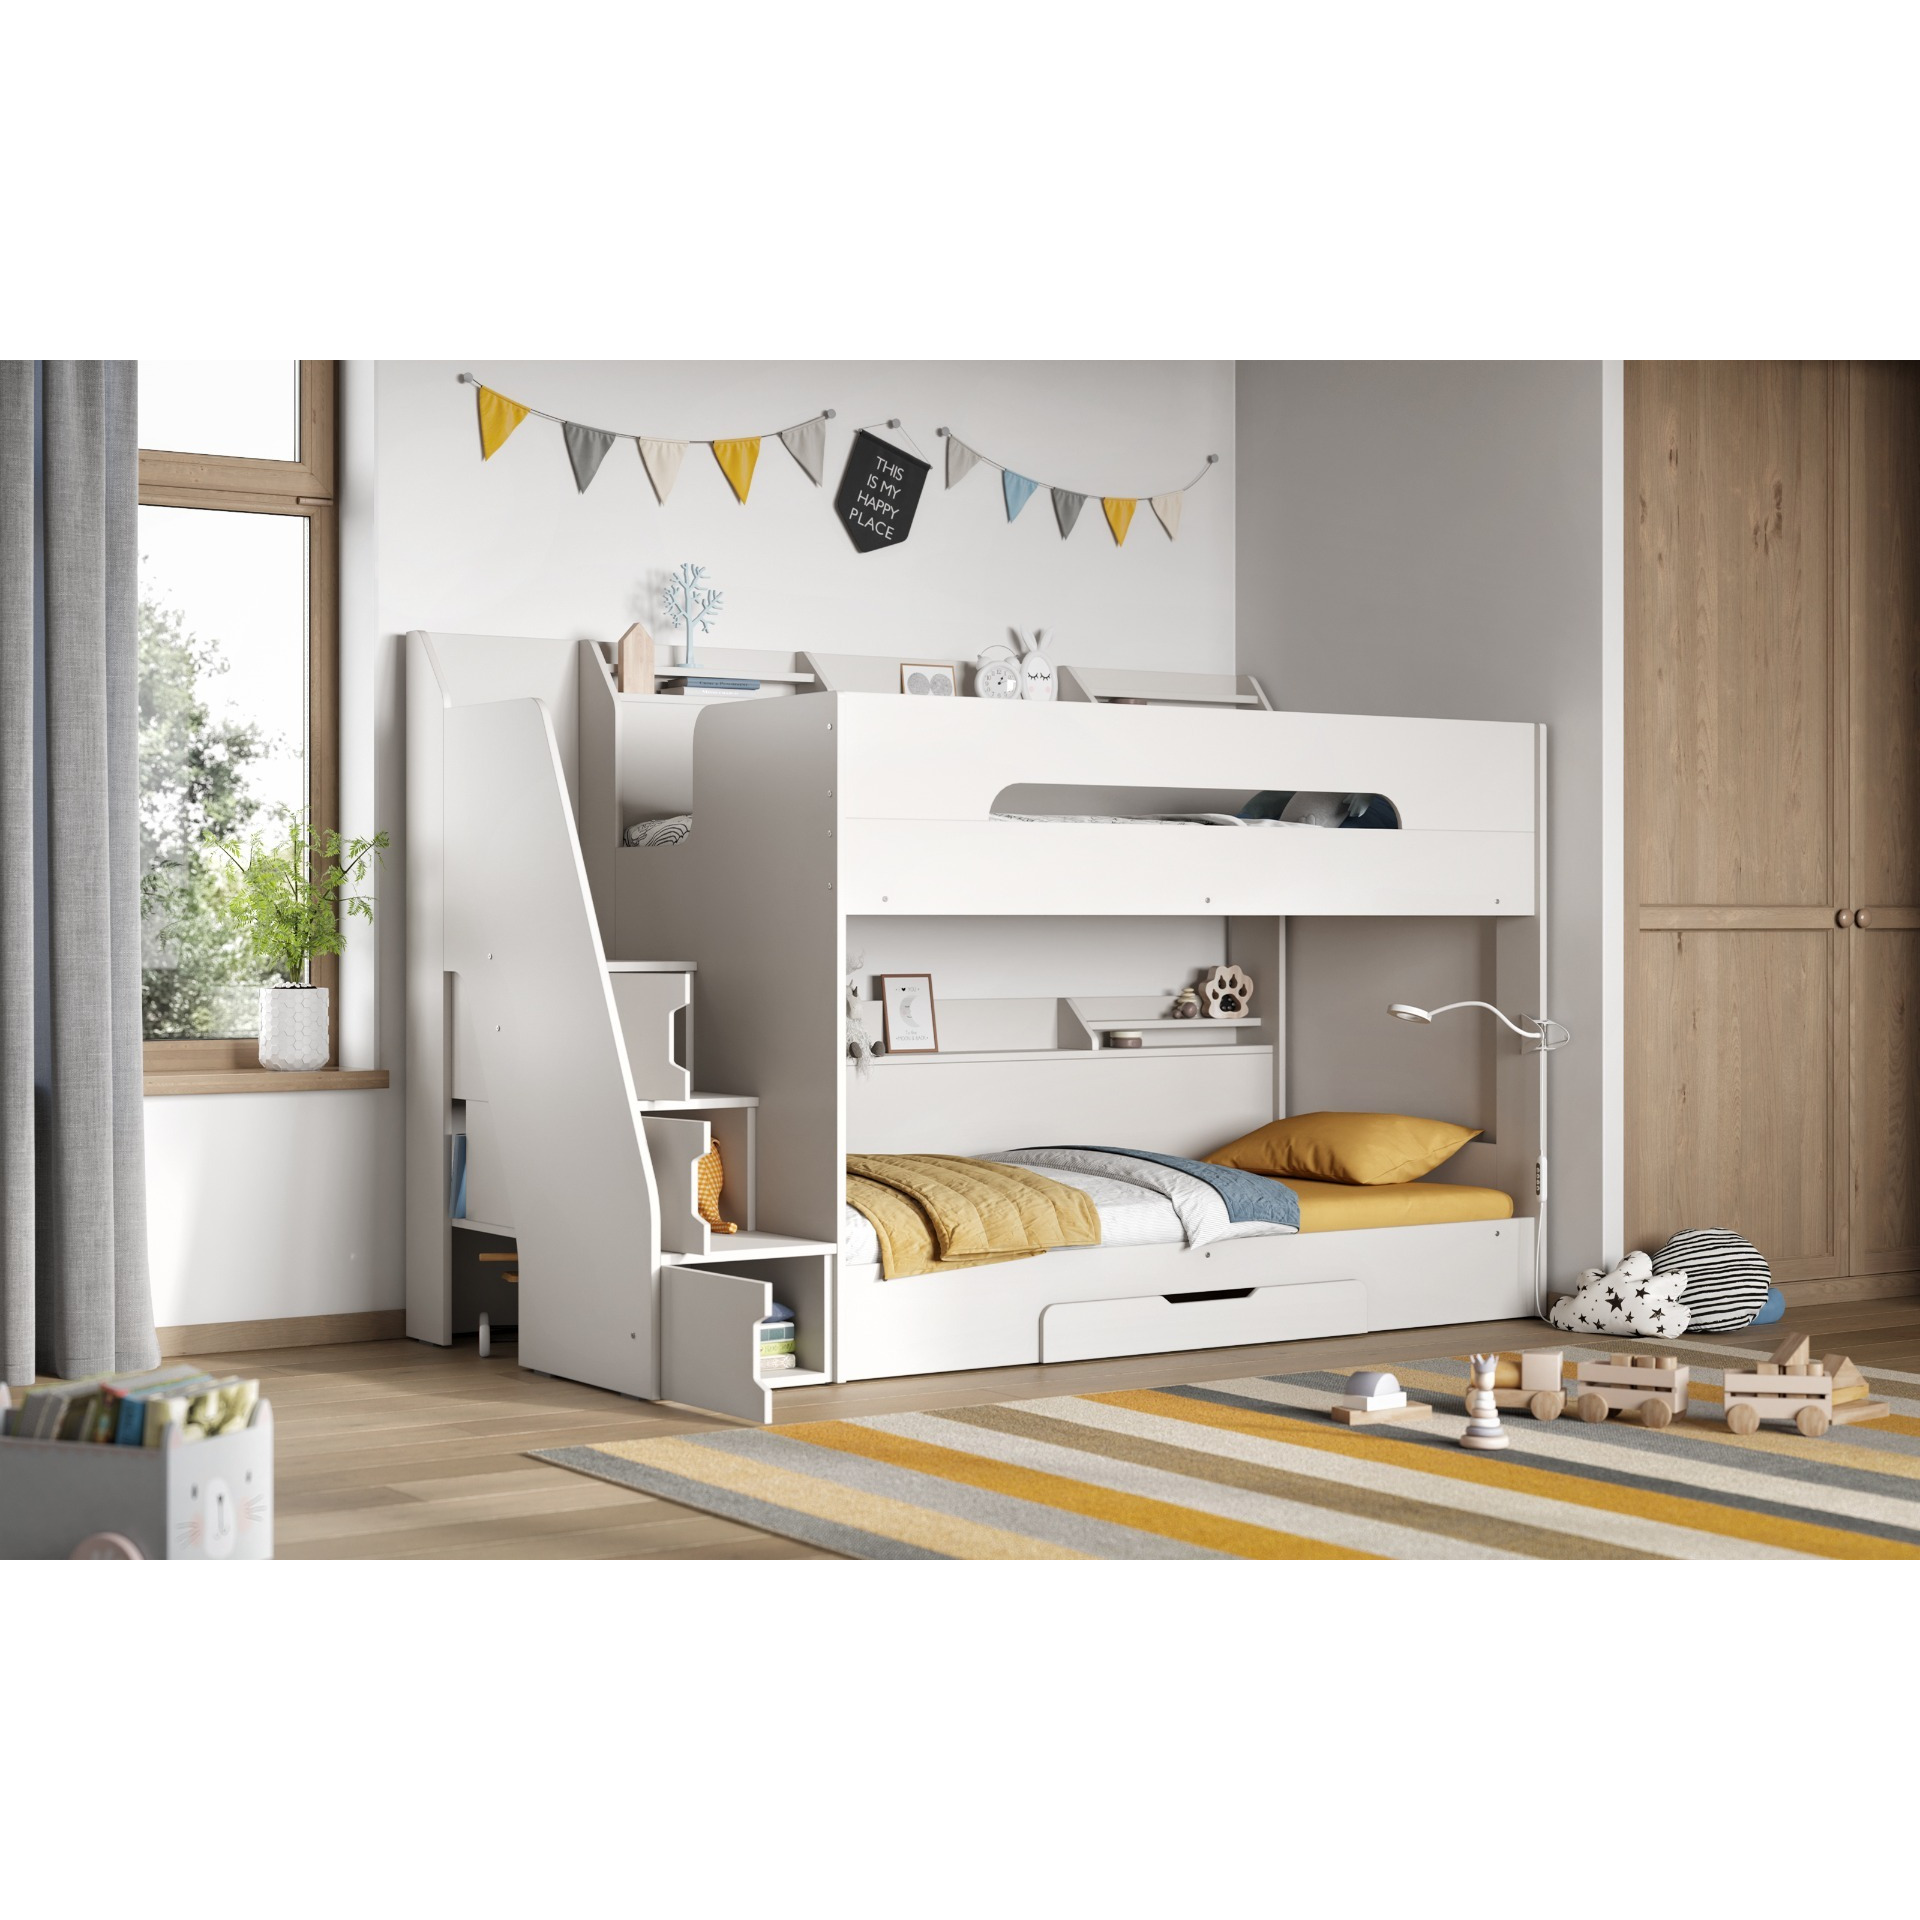 Flair Slick Staircase Bunk Bed White - image 1